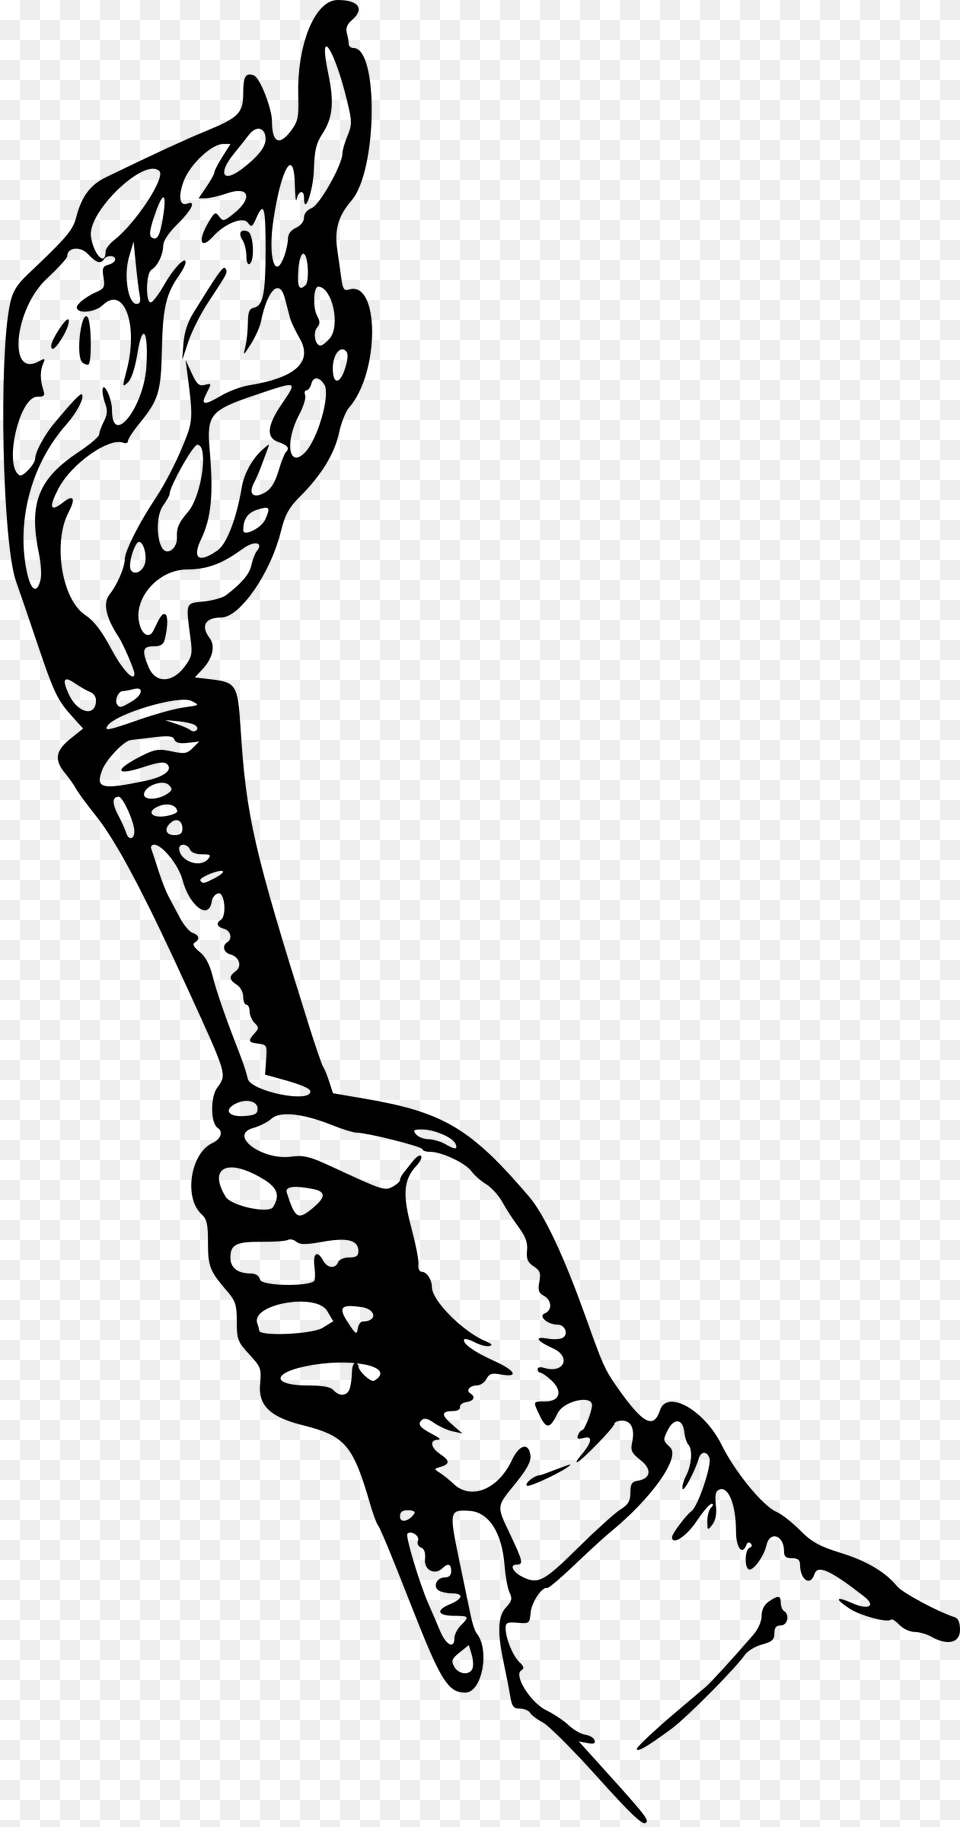 Transparent Fire Images Hand Holding Torch, Gray Png